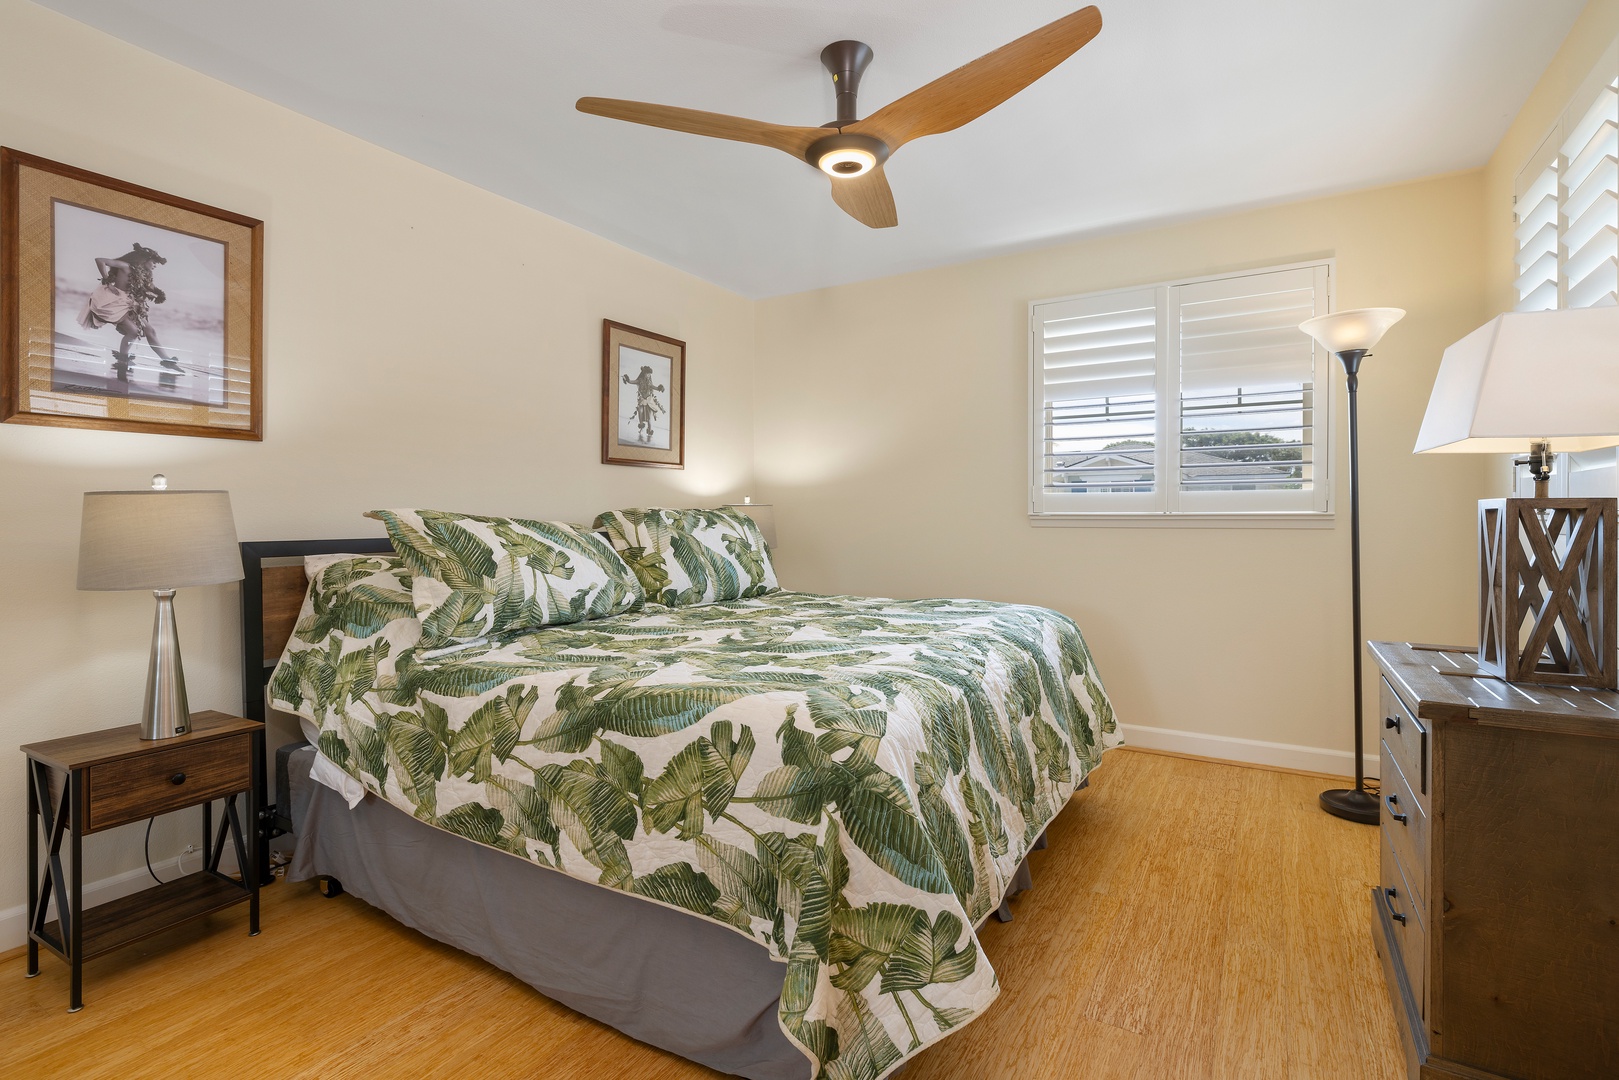 Kapolei Vacation Rentals, Ko Olina Kai 1083C - The upstairs guest bedroom featuring a large mirror, ceiling fan and framed art.